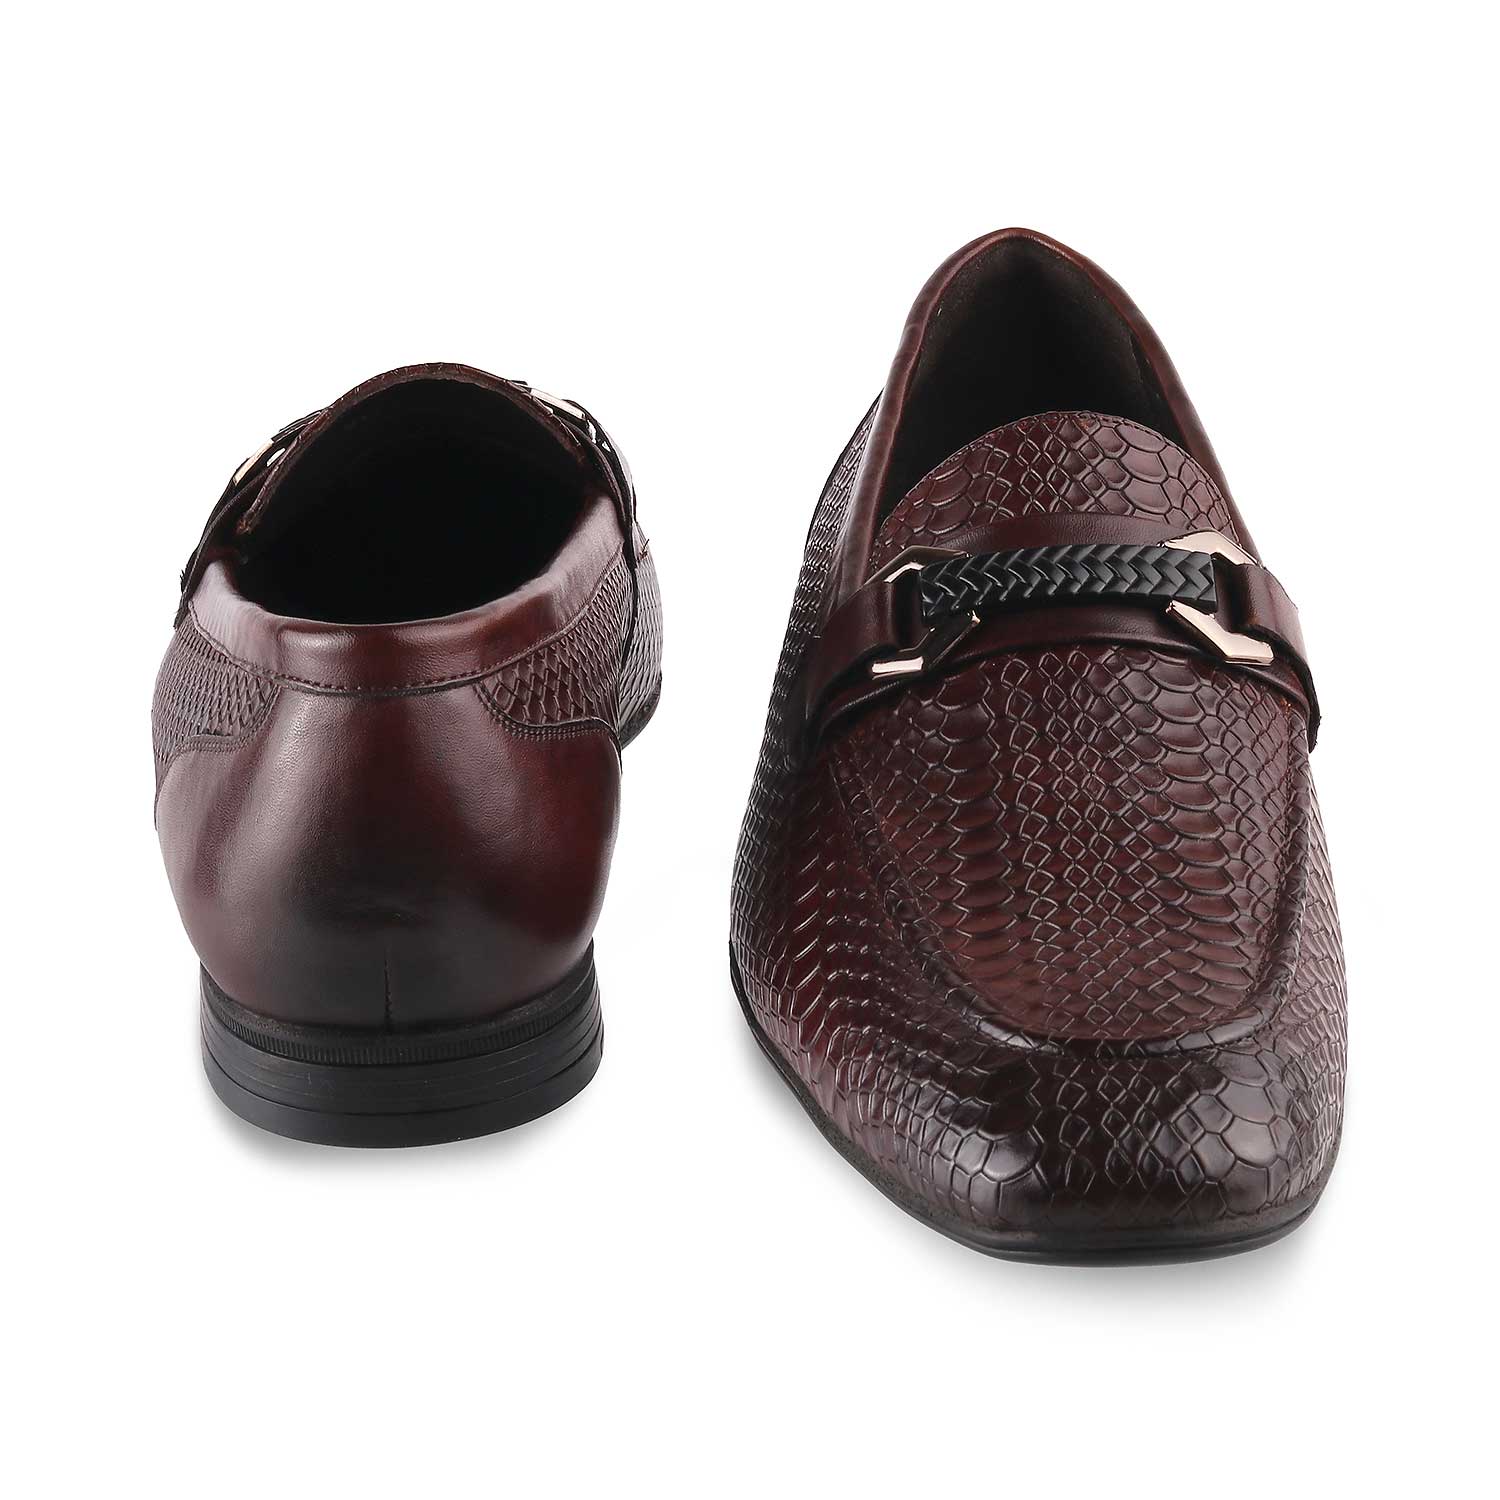 The Cytom Tan Men's Leather Loafers Online at Tresmode.com